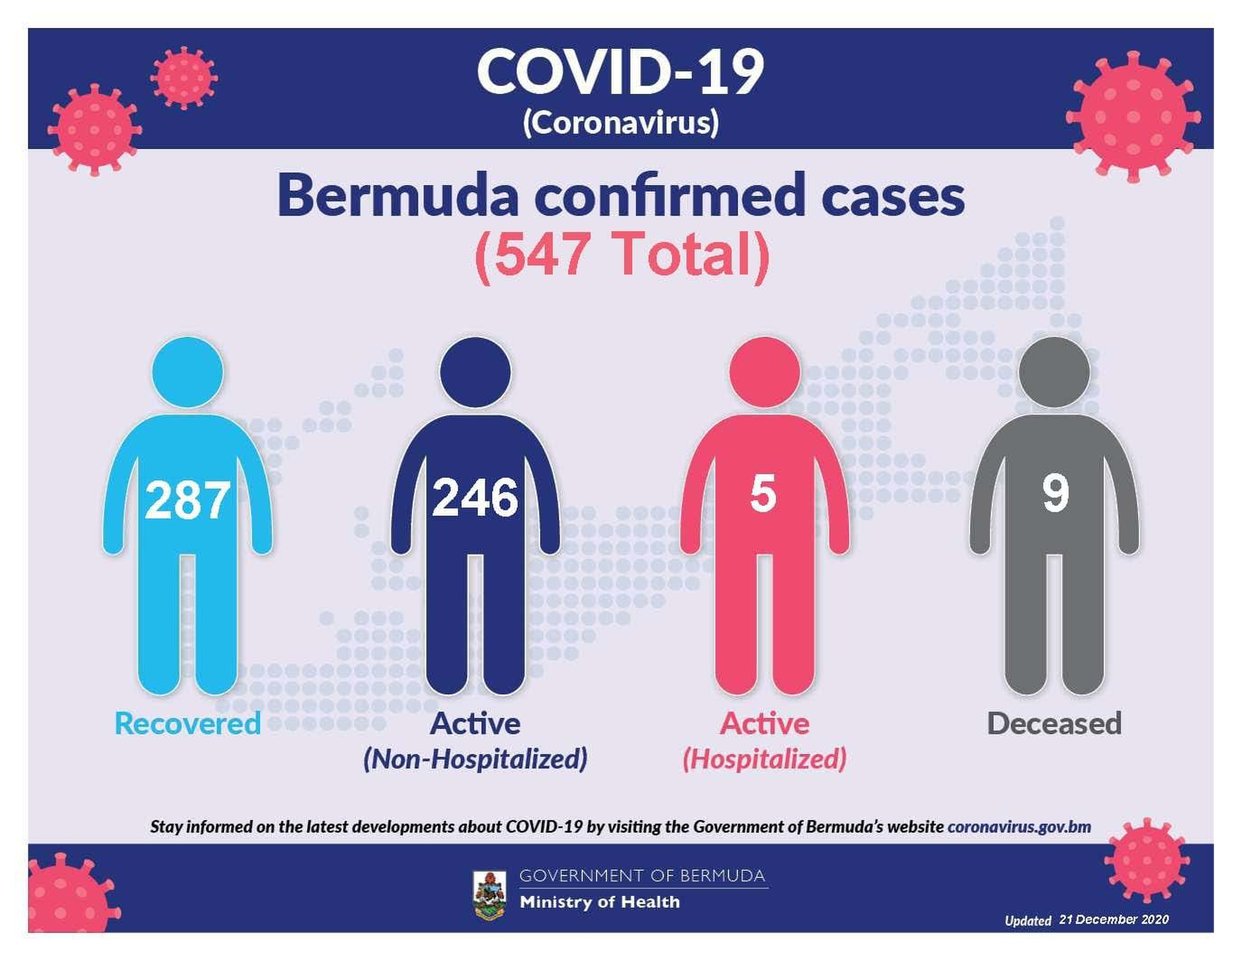 20 new COVID-19 cases detected in Bermuda over the weekend